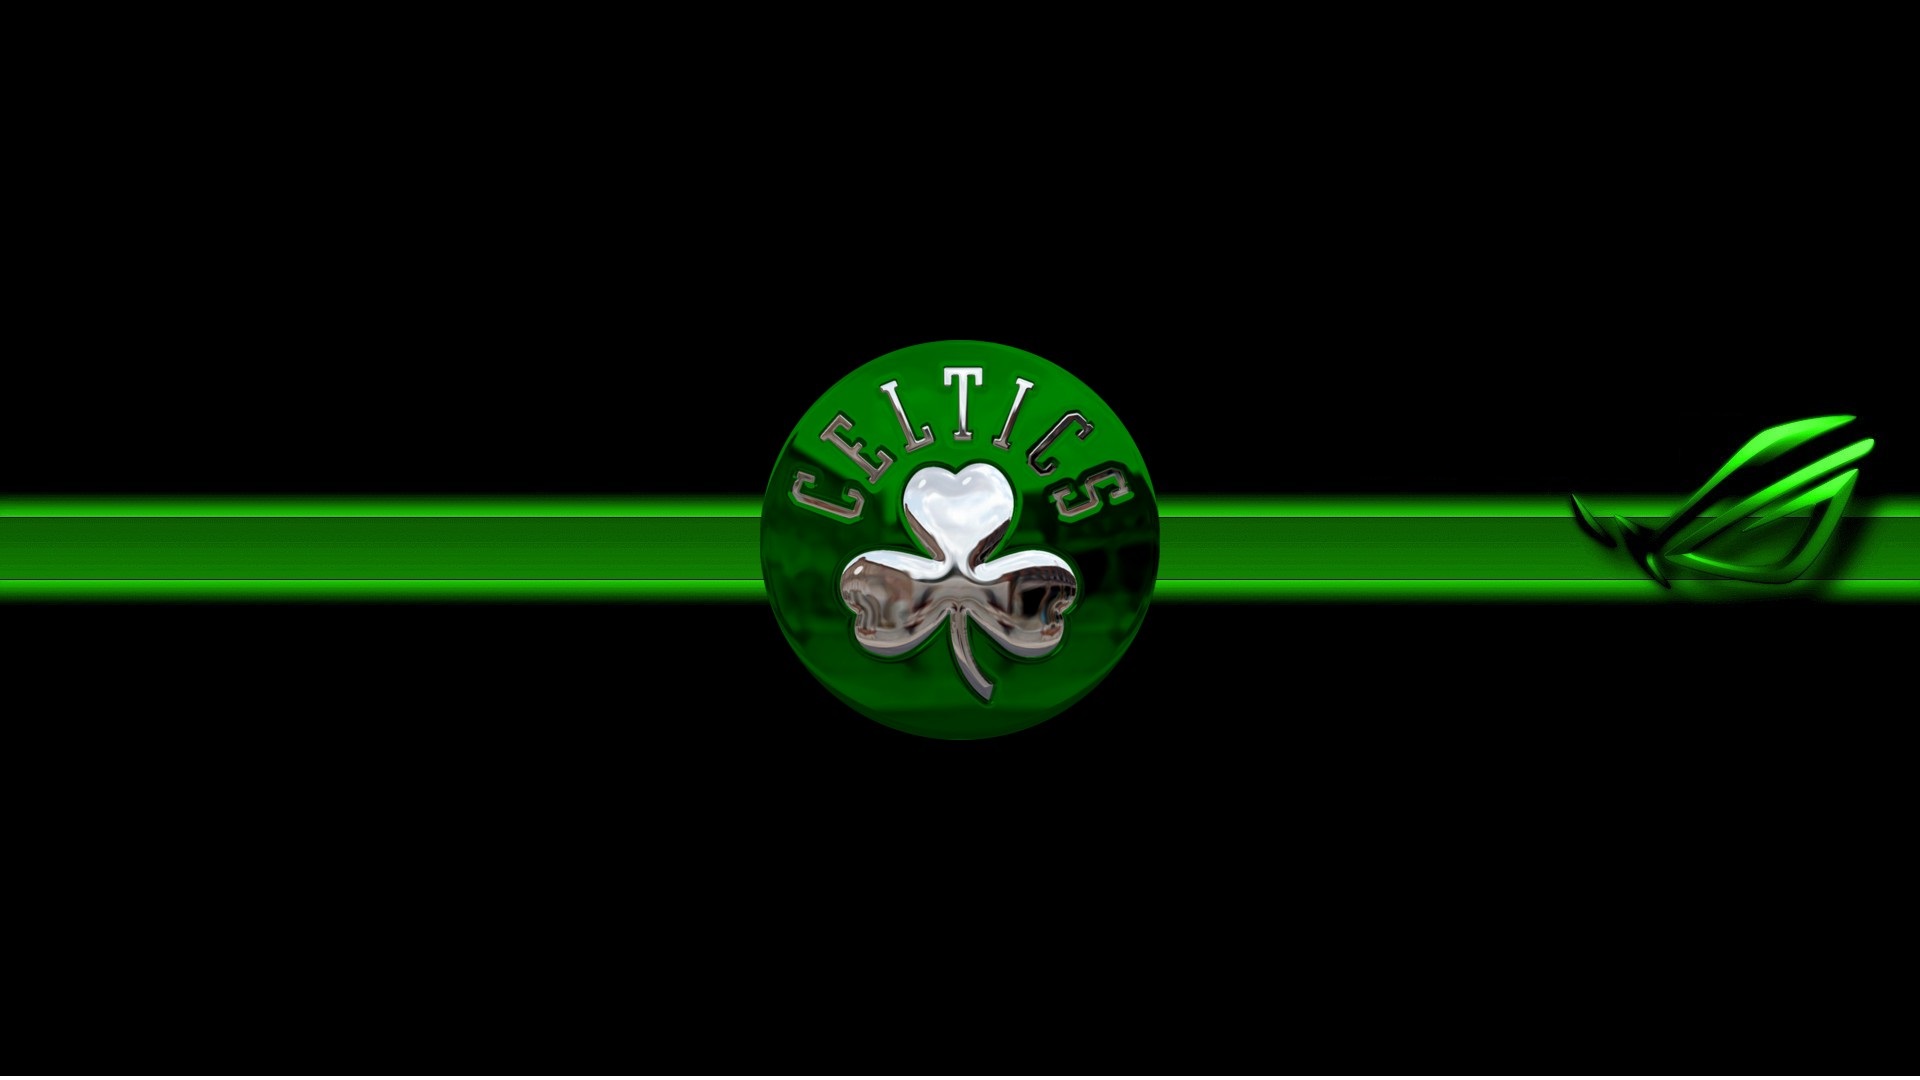 Wallpapers HD Celtics with high-resolution 1920x1080 pixel. You can use this wallpaper for your Desktop Computer Backgrounds, Windows or Mac Screensavers, iPhone Lock screen, Tablet or Android and another Mobile Phone device